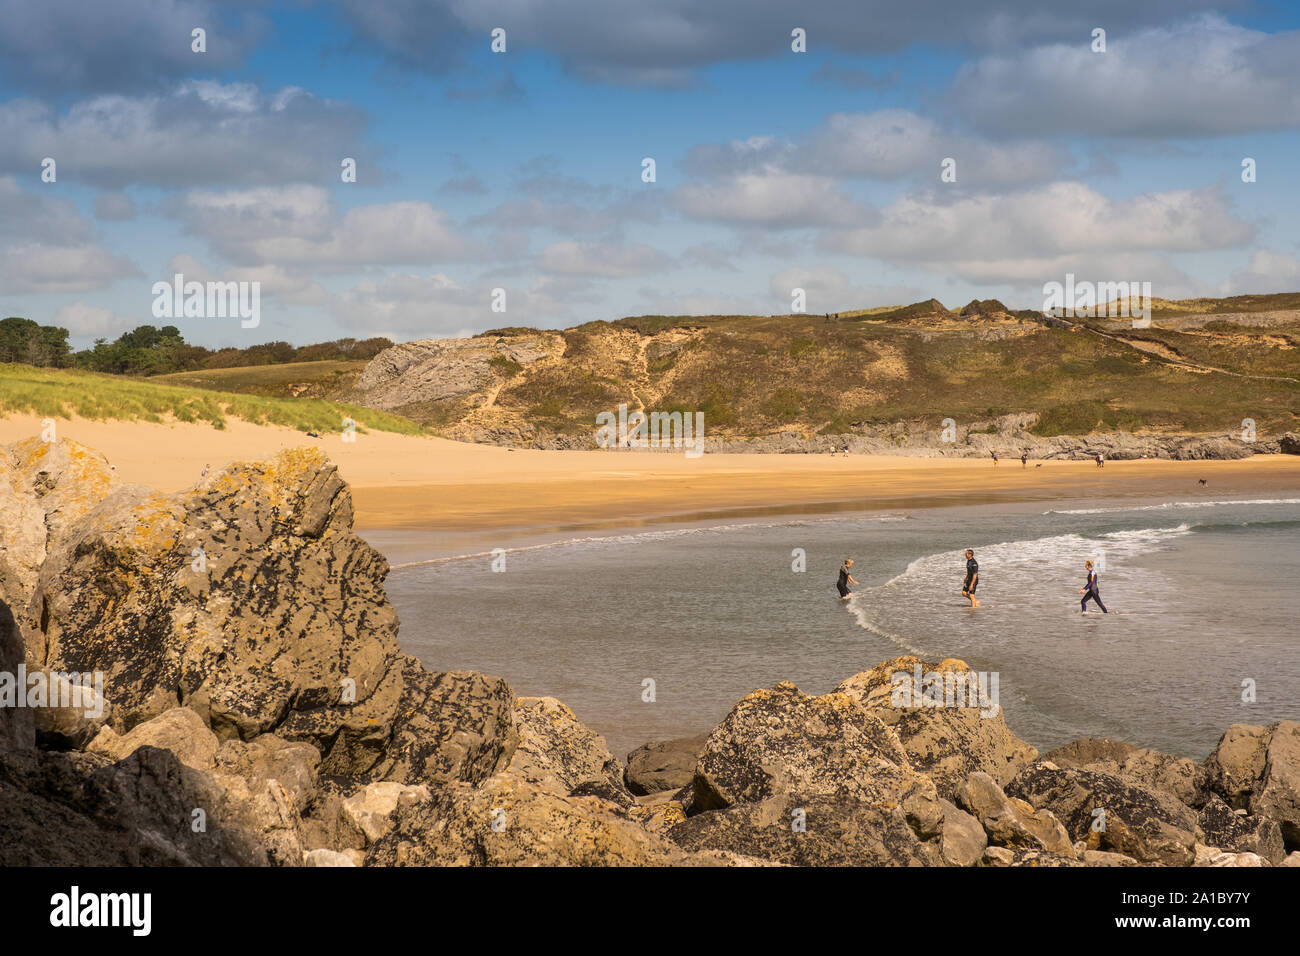 Travel and tourism : People enjoying a late summer afternoon on the golden sands at Broadhaven South beach and coastline, Pembrokeshire , south west Wales UK Stock Photo